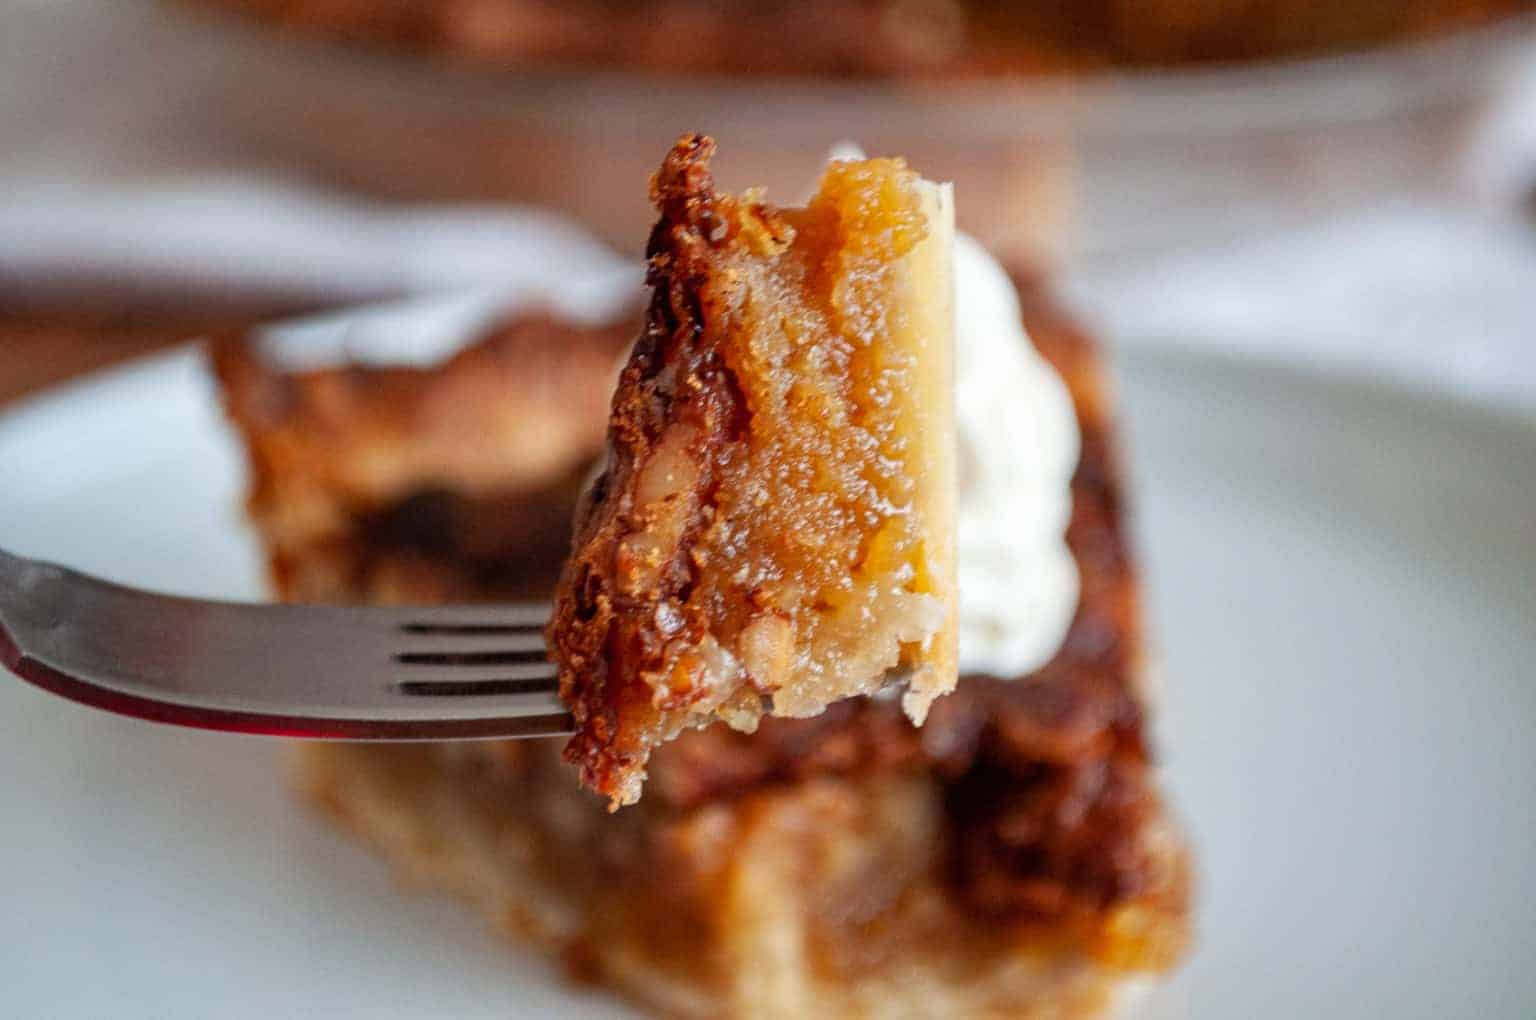 <p>Travel back in time with our classic pecan pie recipe, free from the use of corn syrup. A flaky pie crust cradles a rich, gooey filling loaded with pecans, capturing the essence of old-fashioned Southern baking at its finest.<br><strong>Get the Recipe: </strong><a href="https://littlehousebigalaska.com/2018/11/pecan-pie-without-corn-syrup.html?utm_source=msn&utm_medium=page&utm_campaign=msn">Old Fashioned Pecan Pie</a></p>